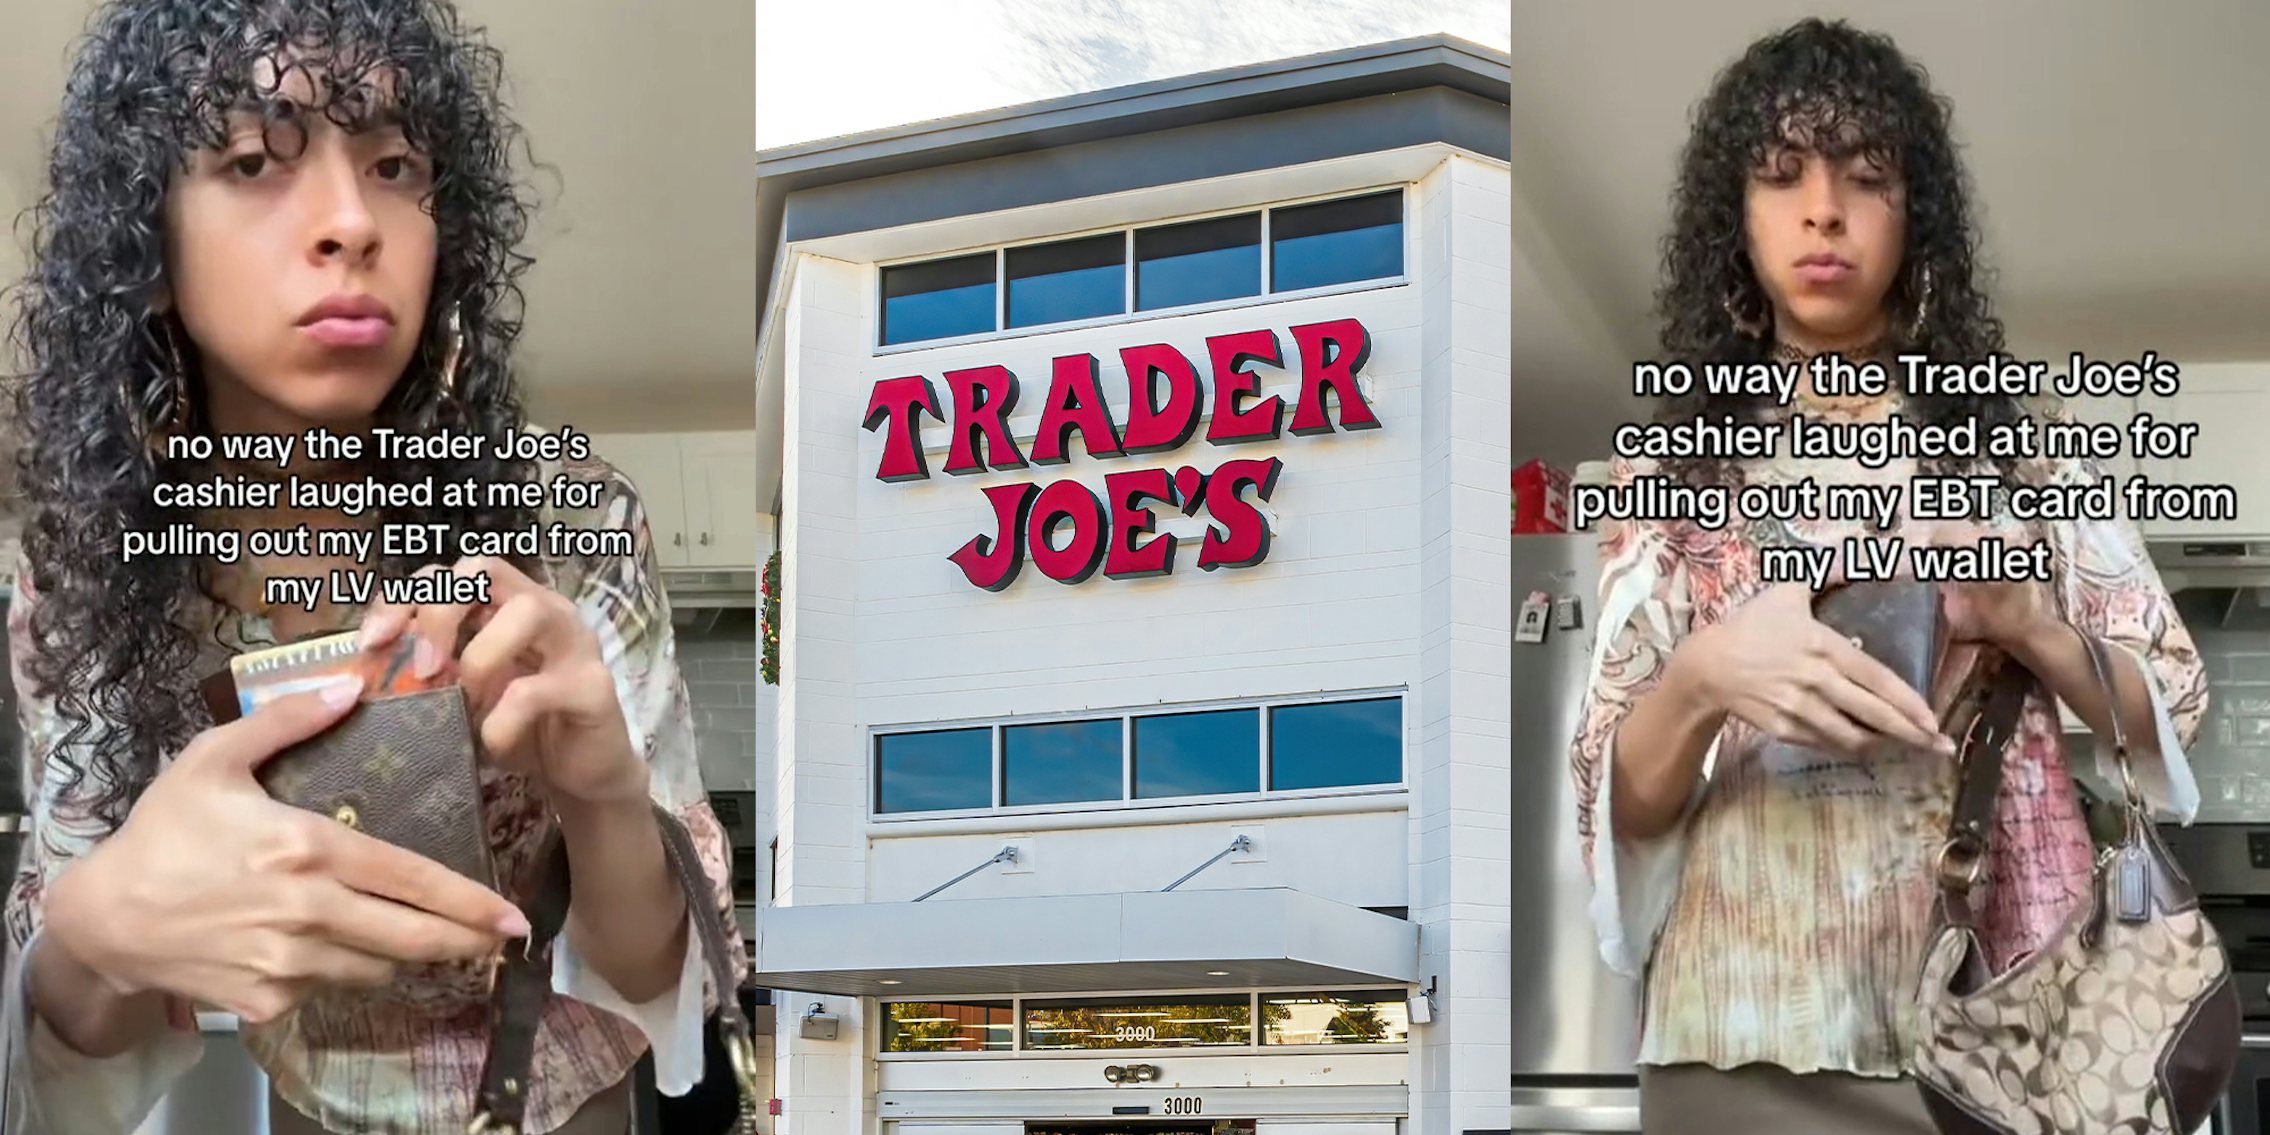 Person says Trader Joe's cashier laughed at them for using an EBT card while having a designer bag